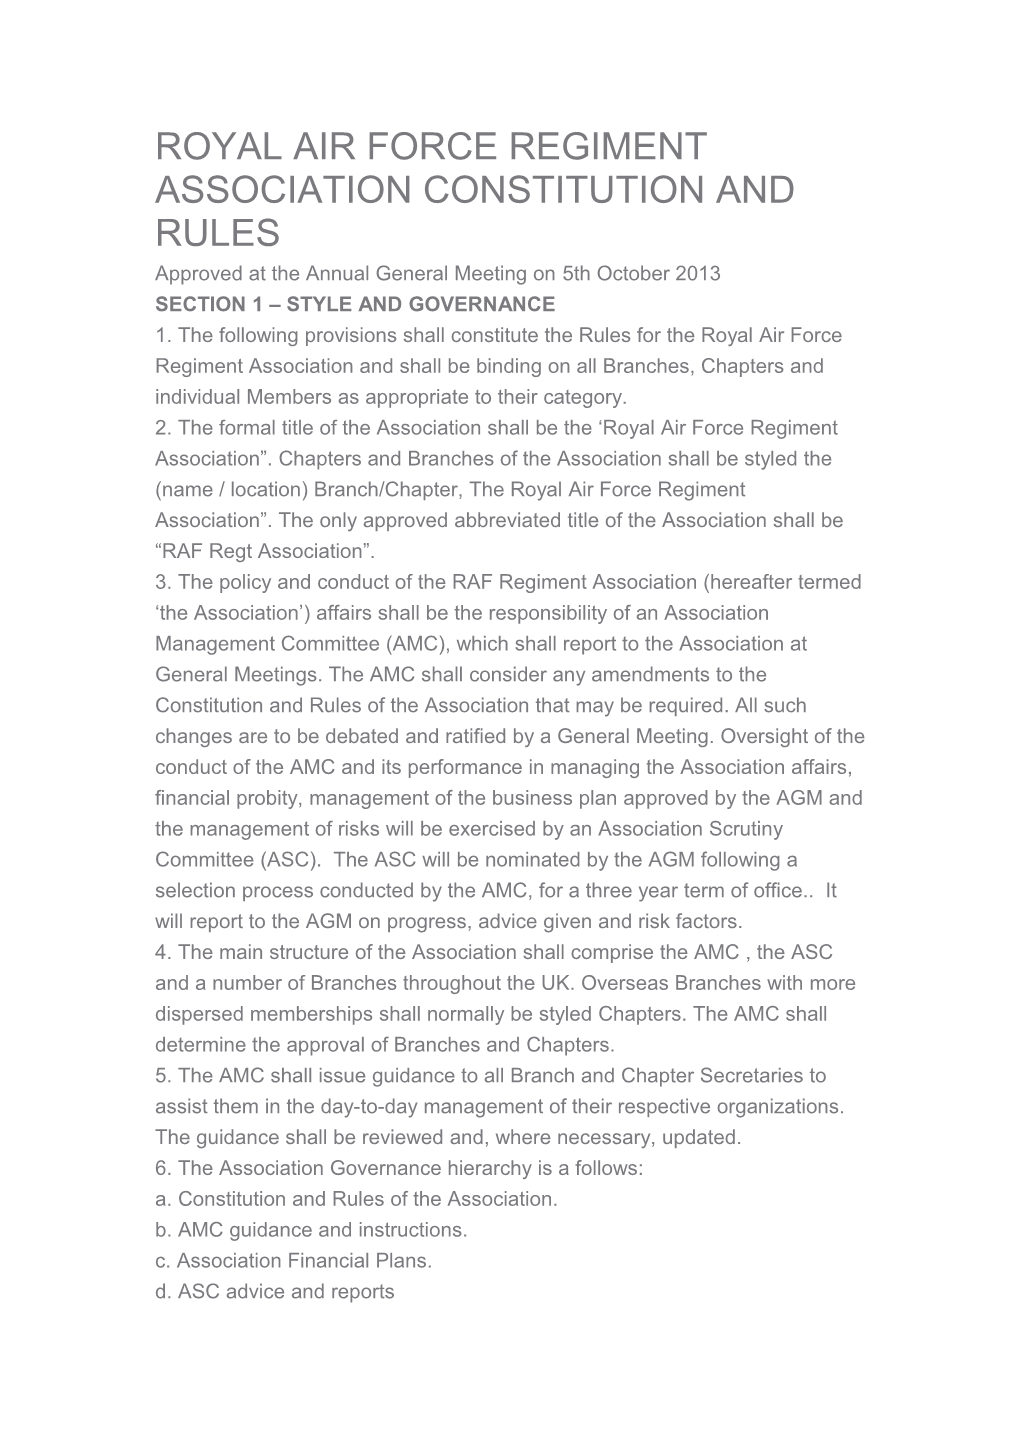 Royal Air Force Regiment Association Constitution and Rules